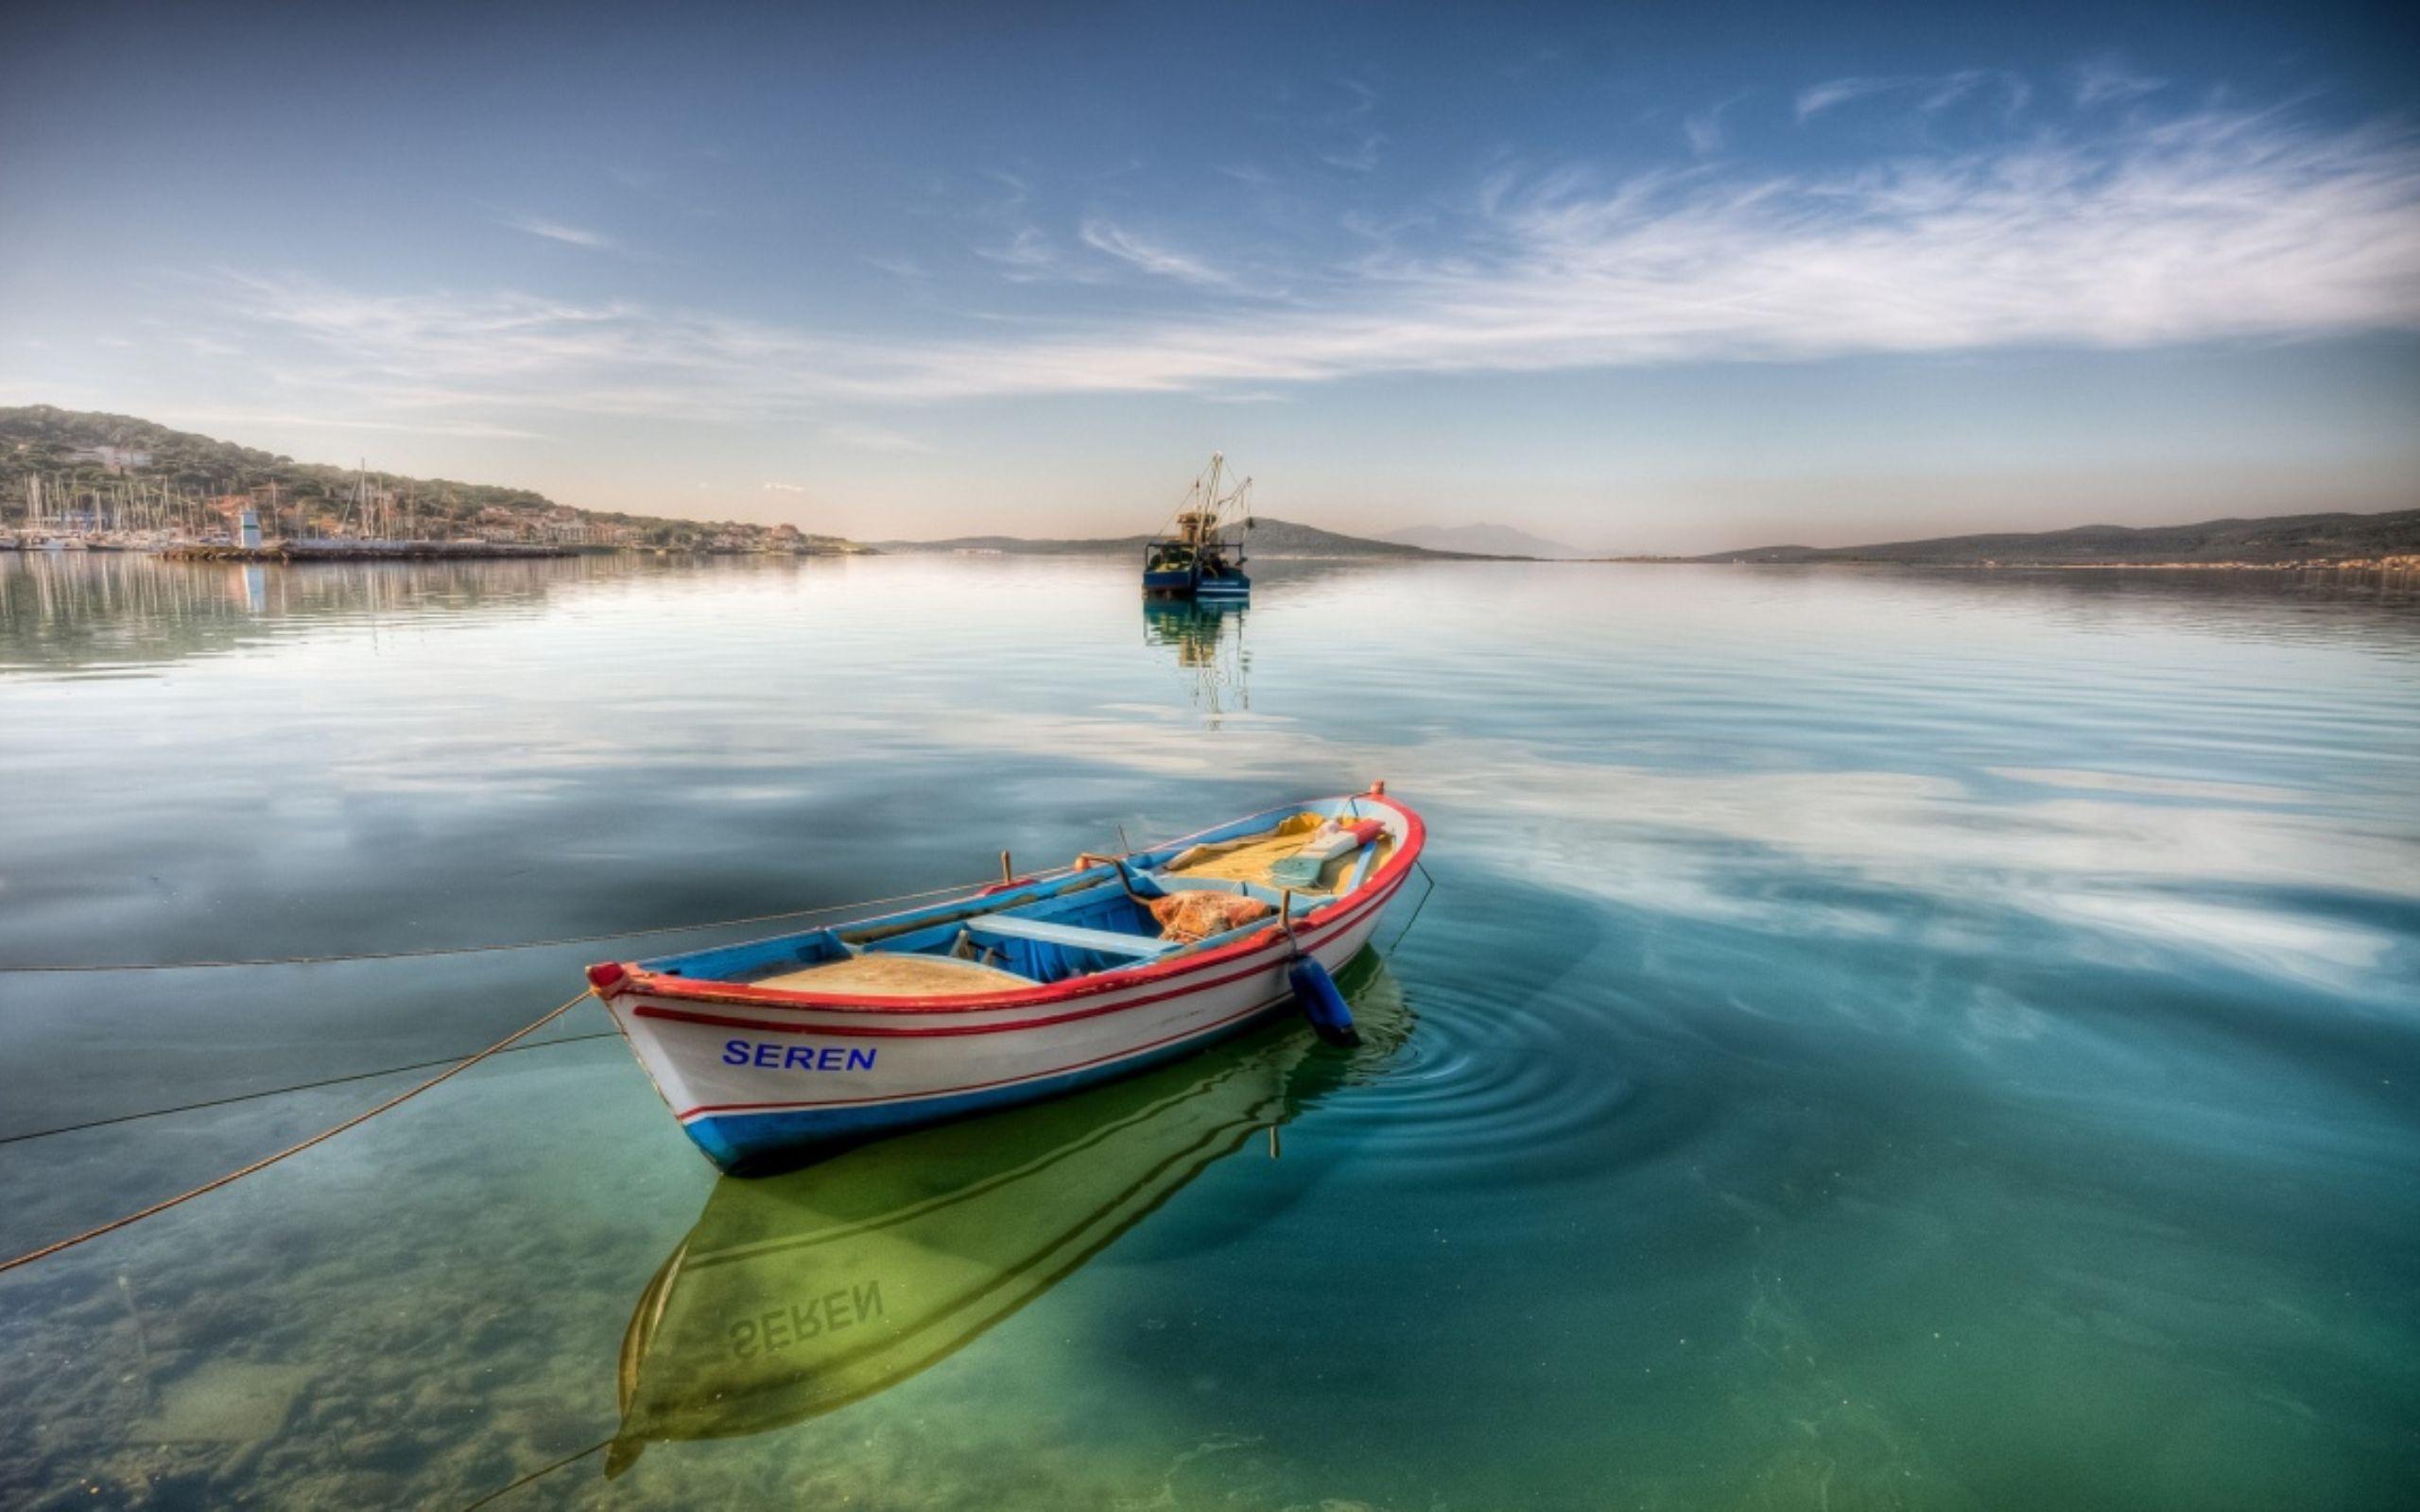 Colorful Boat In Water Reflection